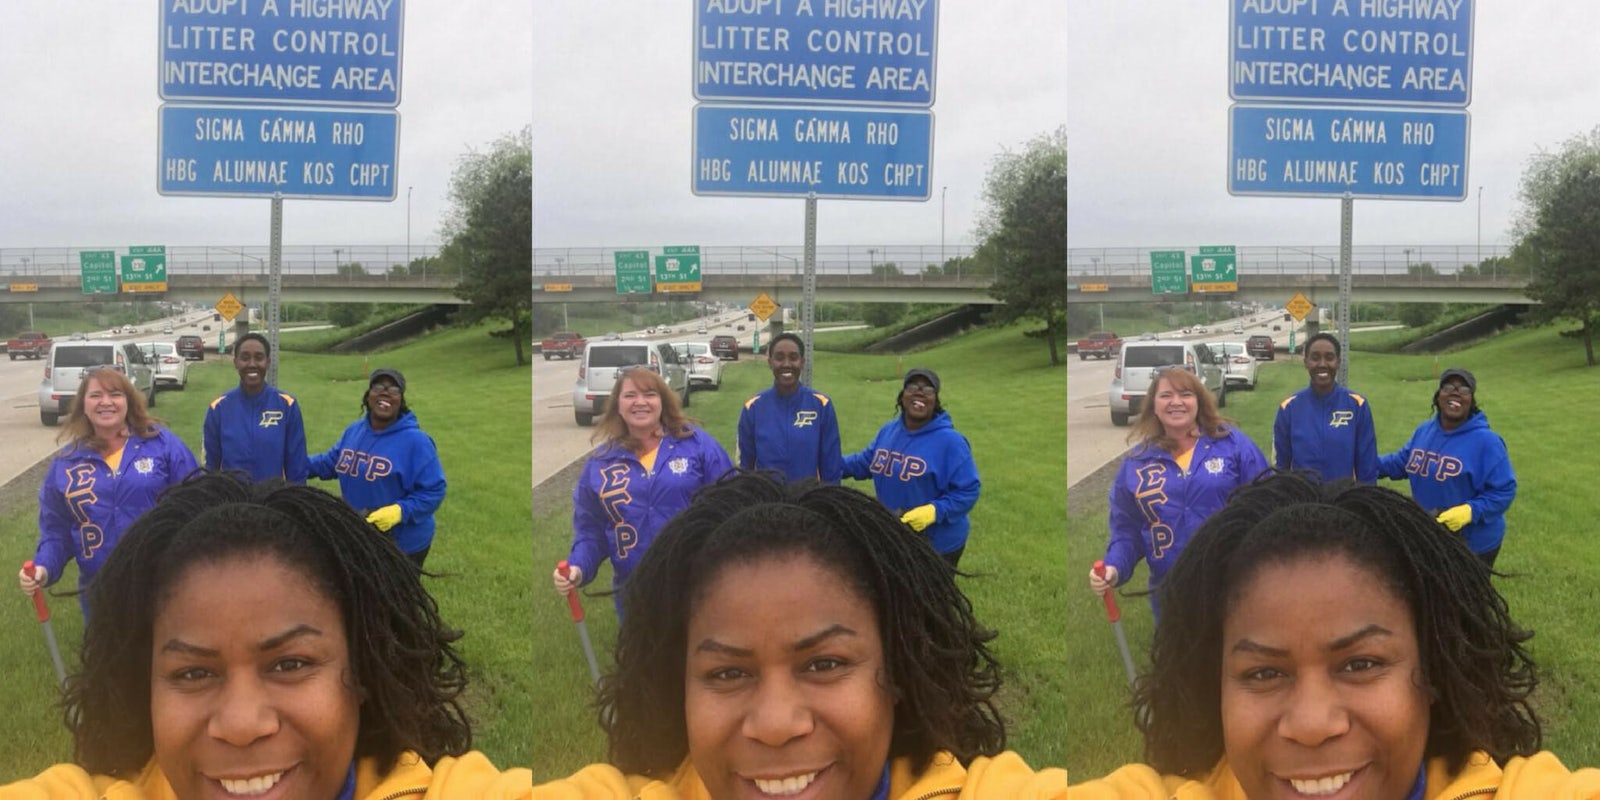 Sigma Gamma Rho sorority women who were questioned by police for cleaning up litter on the side of a highway.